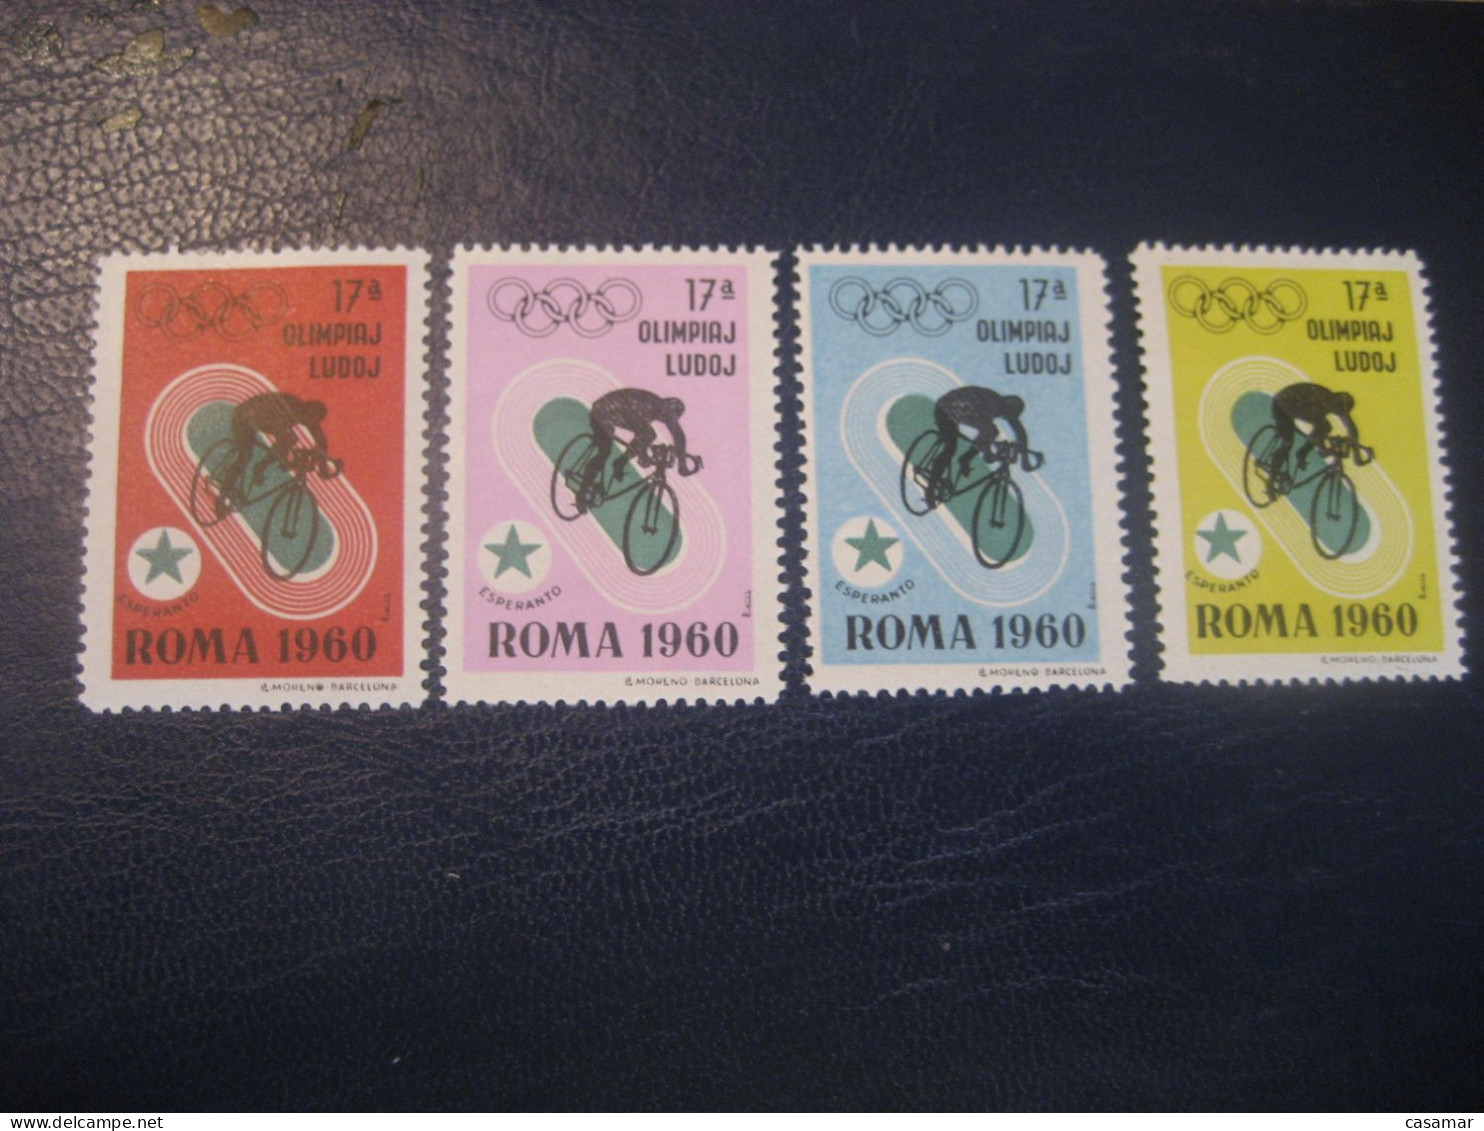 ROMA 1960 Cycling Cyclisme Olympic Games Olympics Esperanto 4 Poster Stamp Vignette ITALY Spain Label - Wielrennen